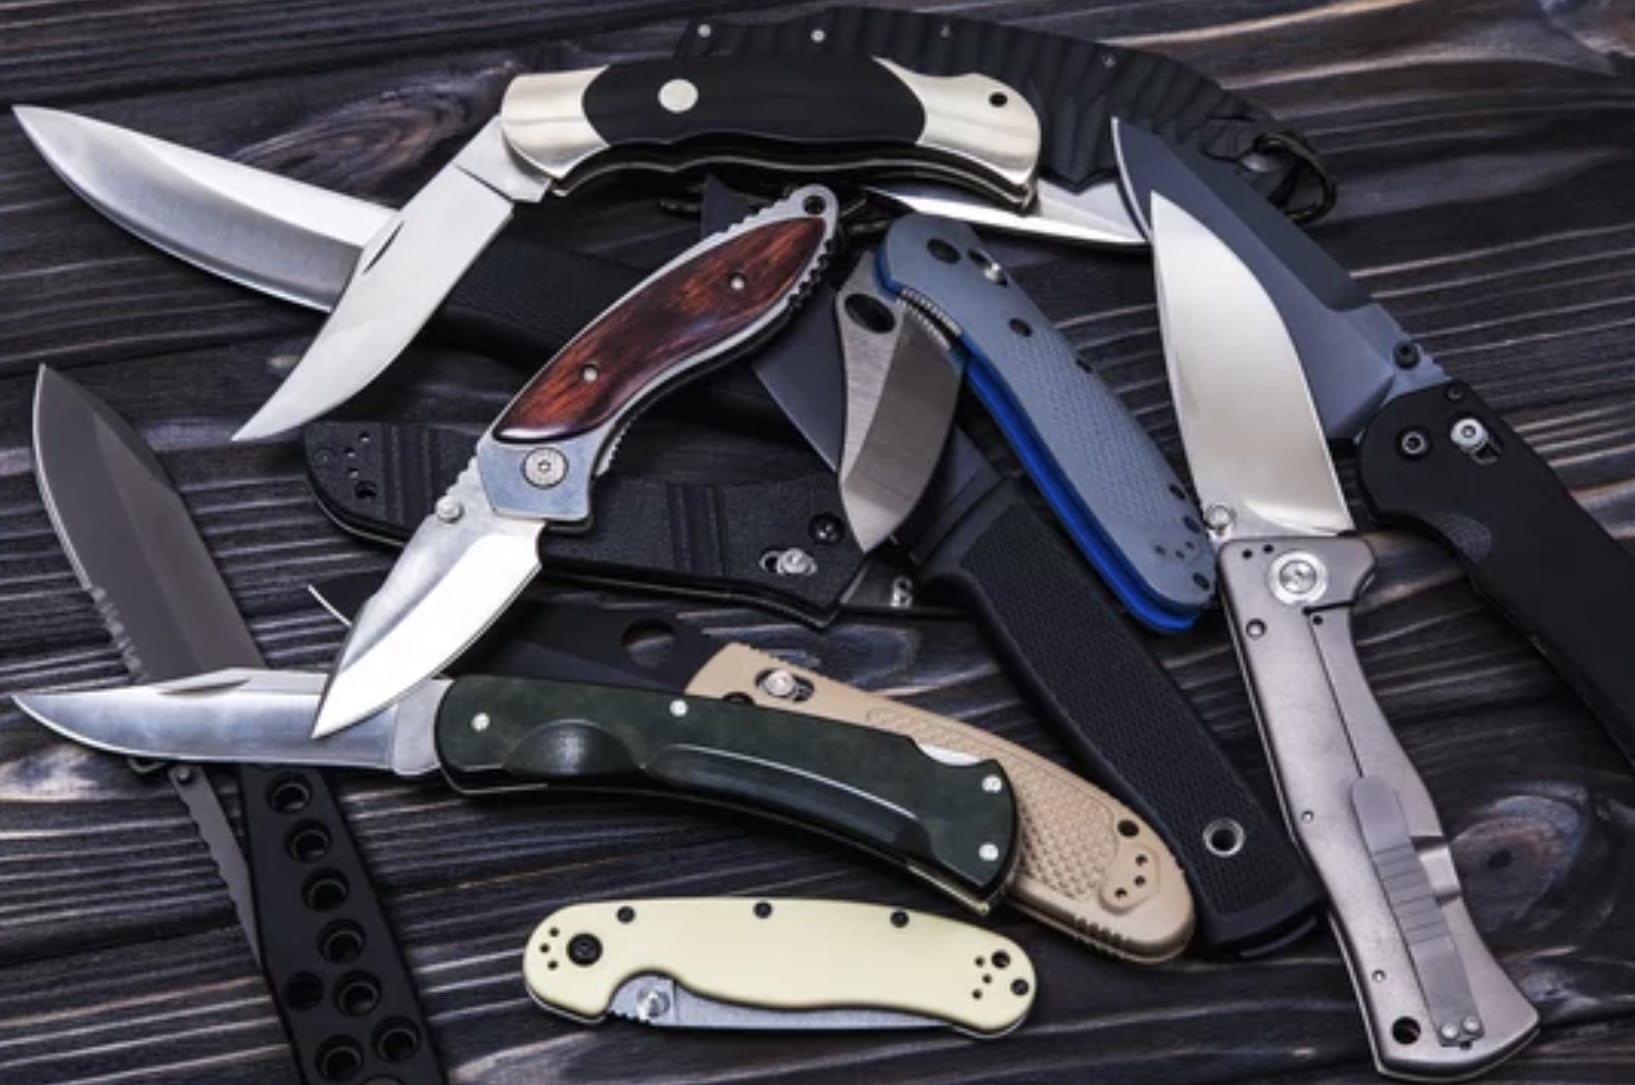 Collection of best self defense knives